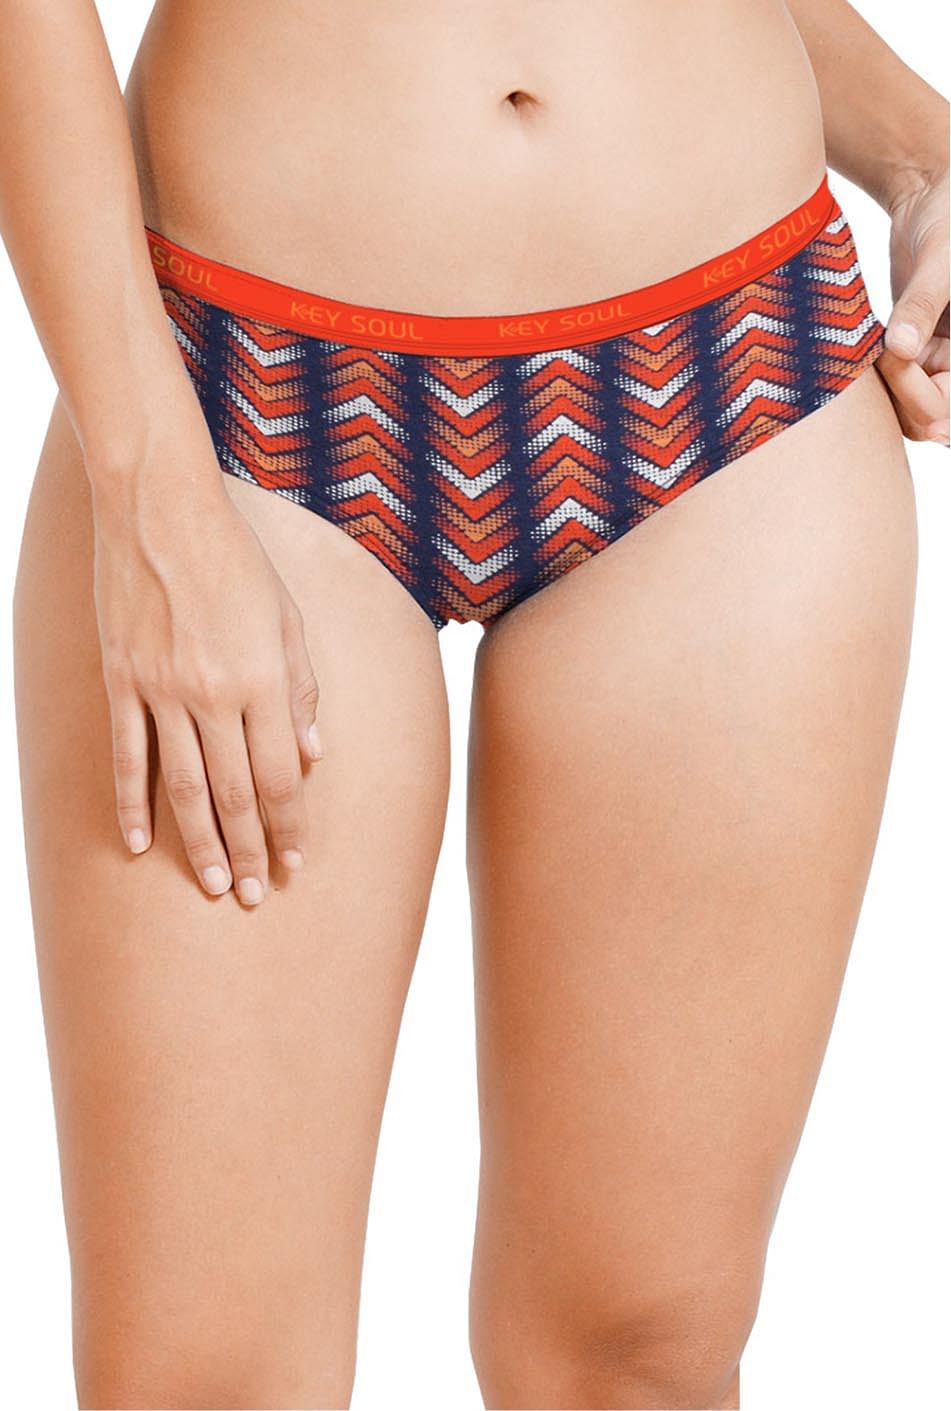 Printed Outer Elastic Panty Pack of 3 - KS002 - Pack - 28 - 3xl/105